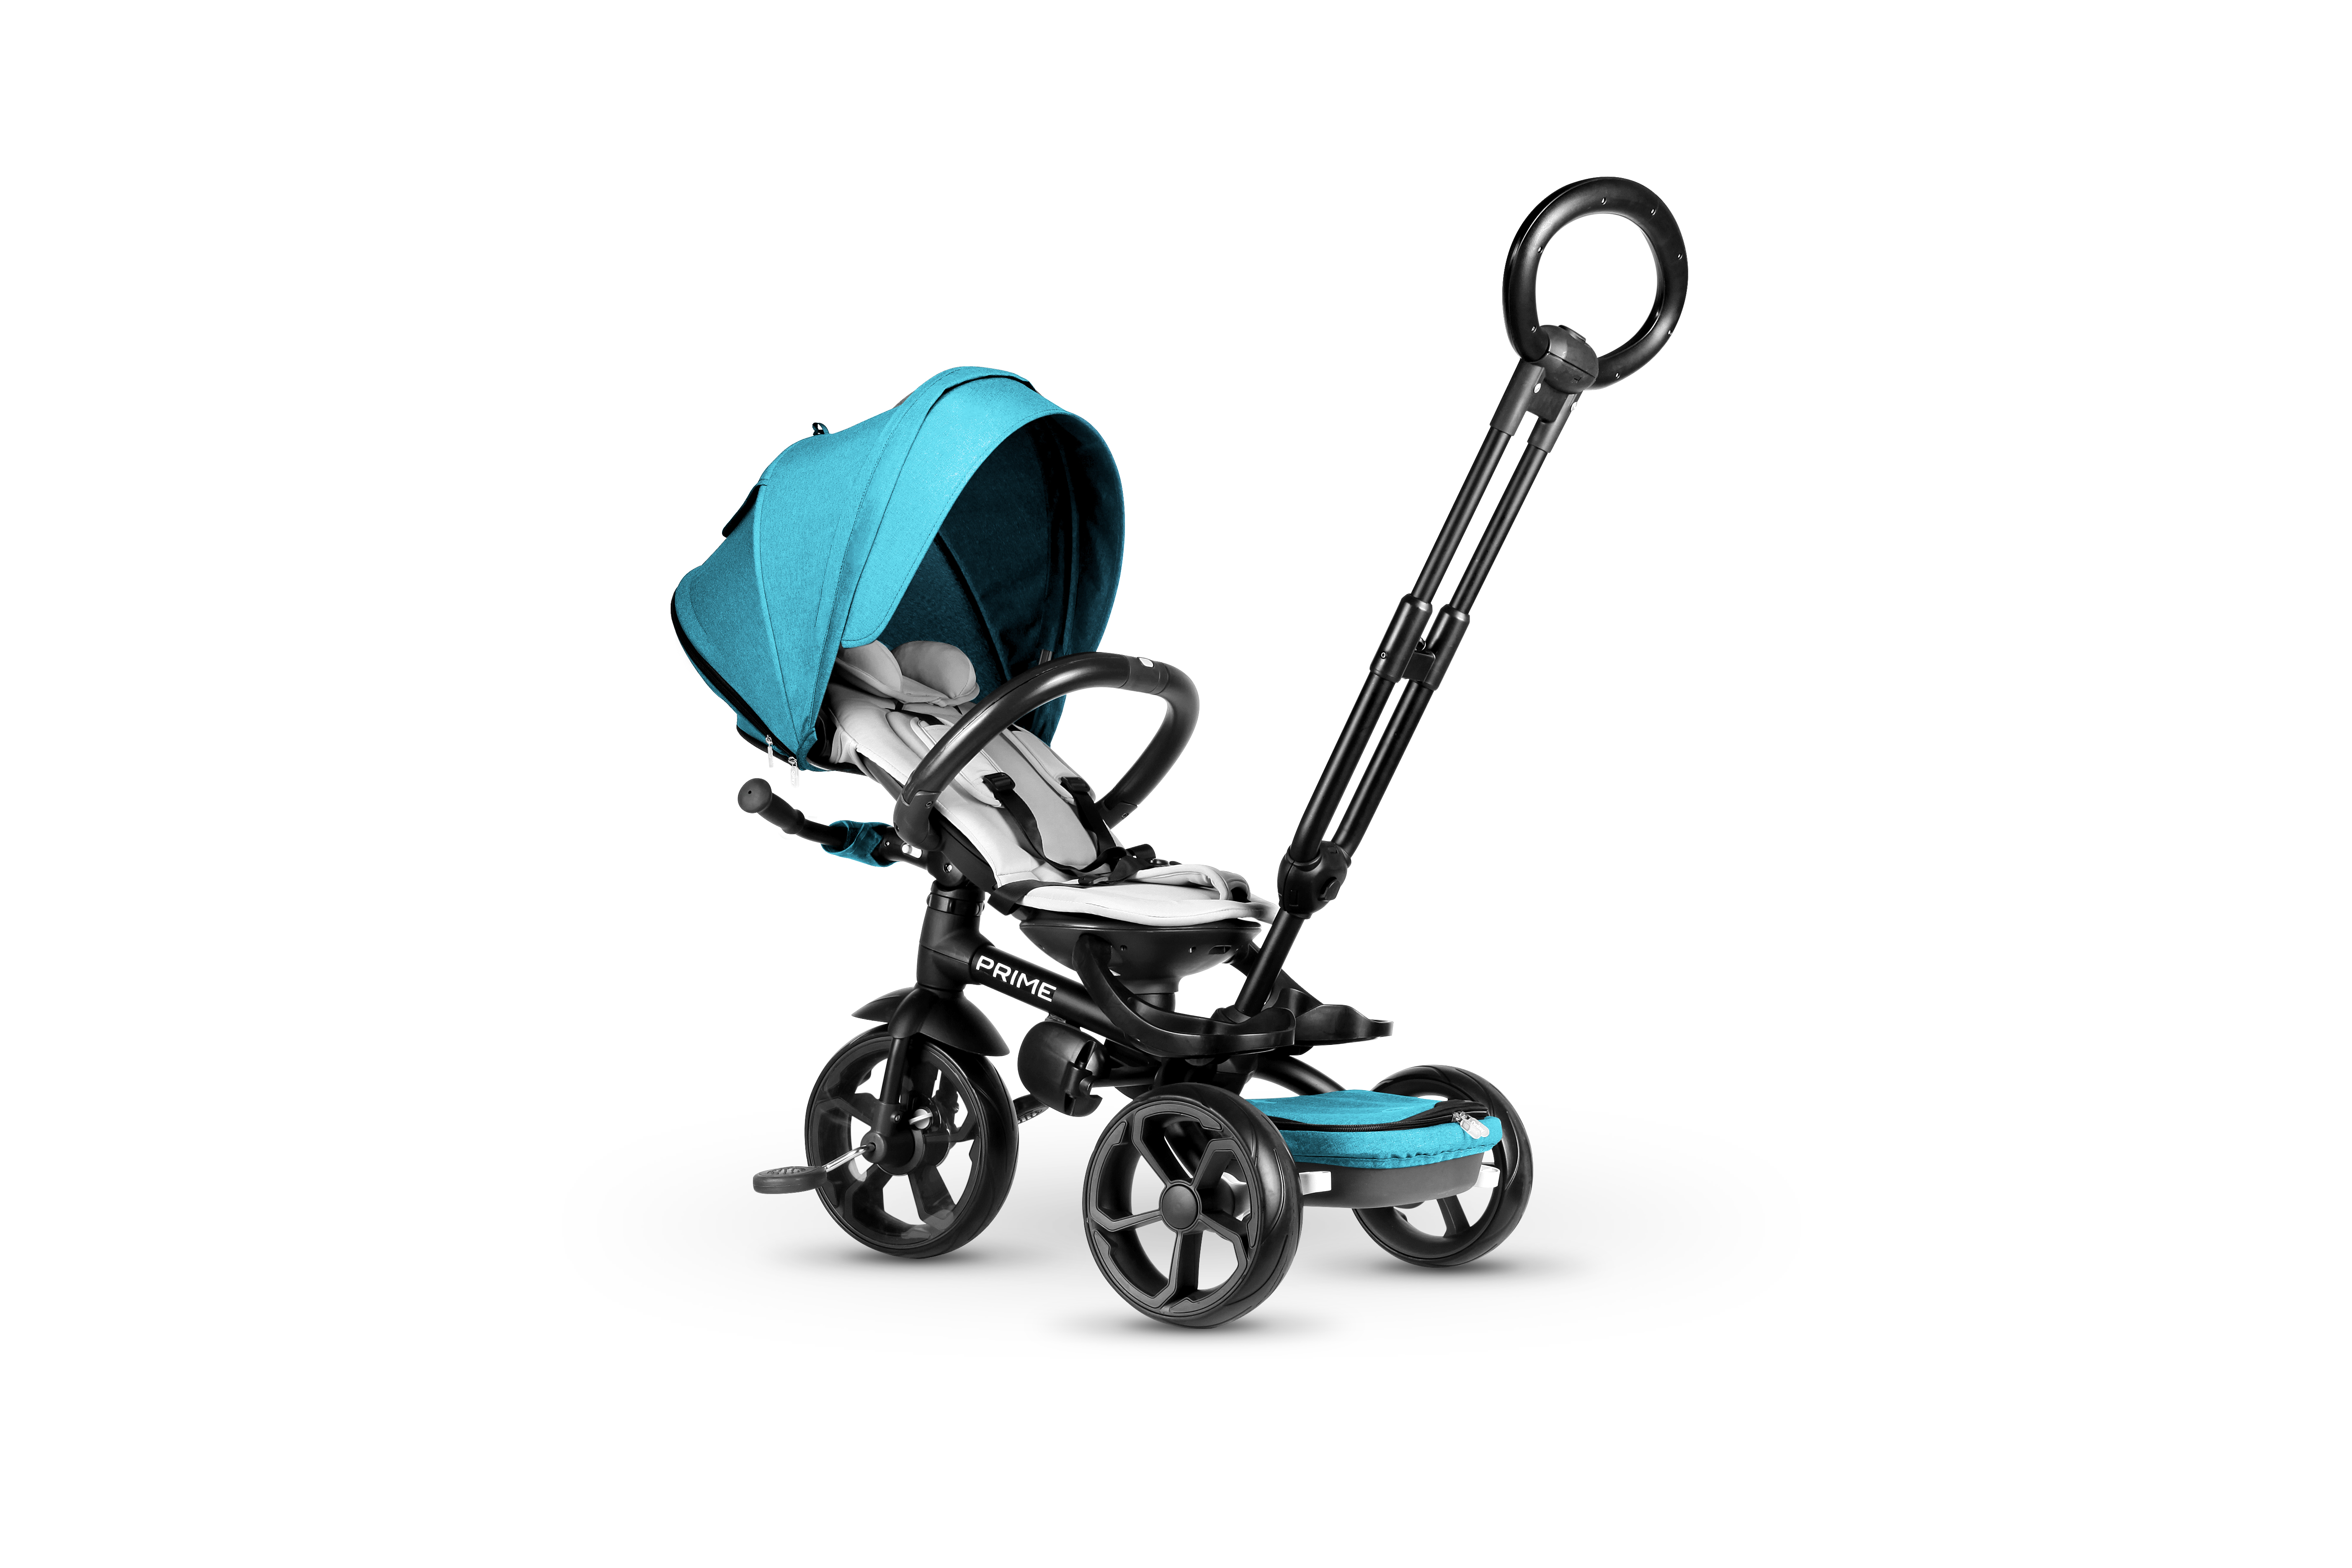 REAL BABY QP10002 TRICICLO PRIME AZZURRO 6+ IN 1